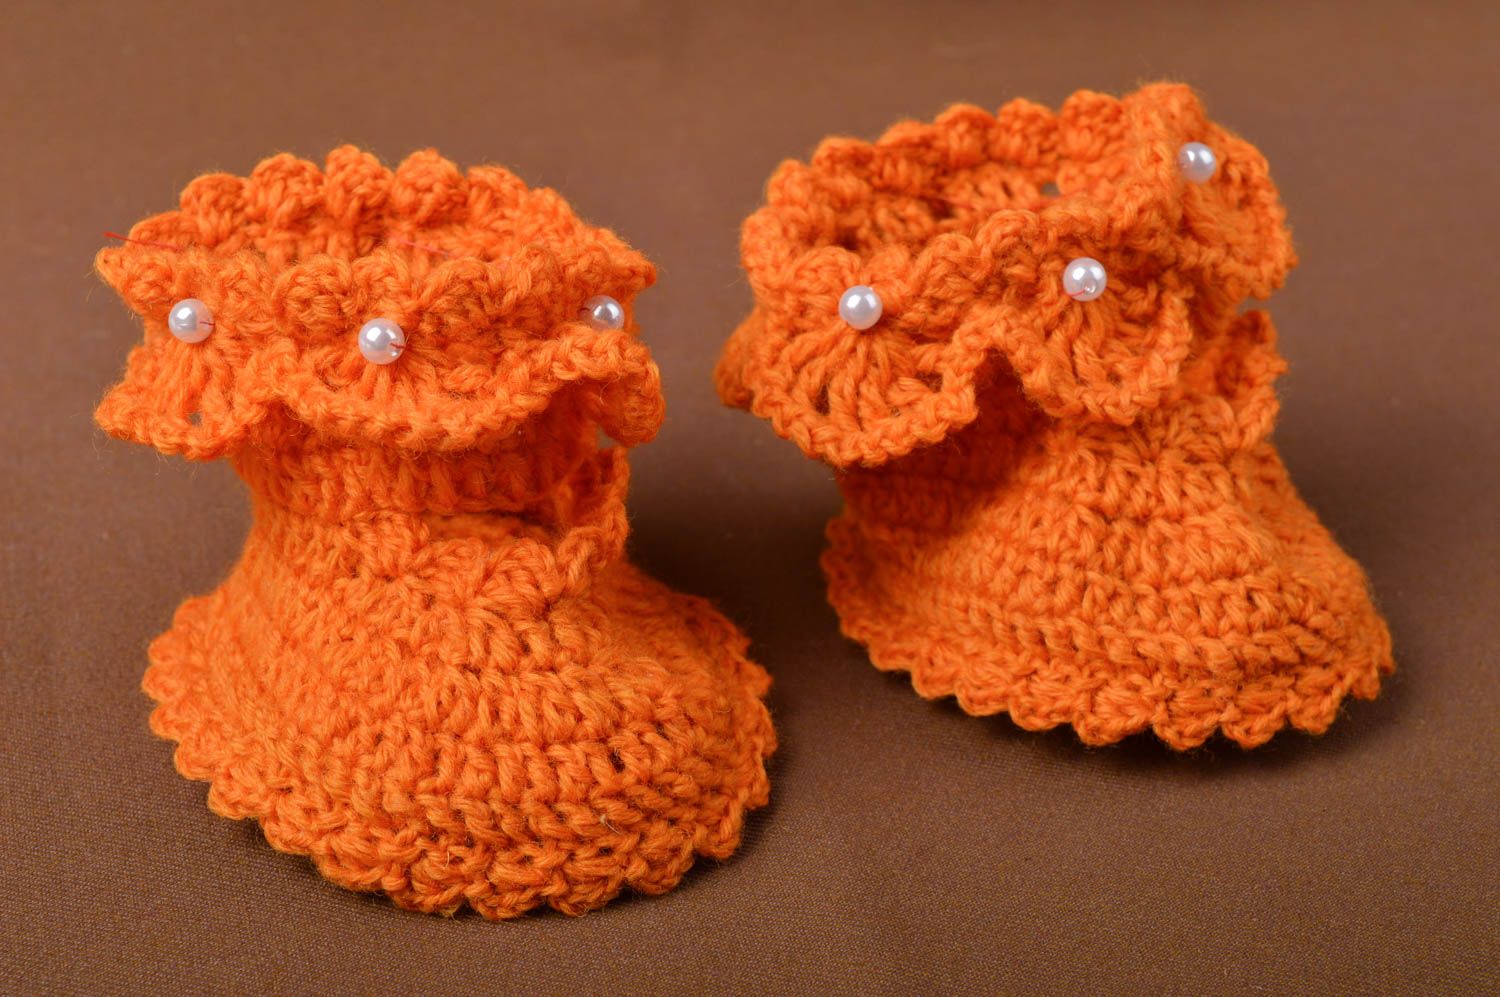 Booties for babies booties for newborns knitted booties baby booties gift ideas photo 1